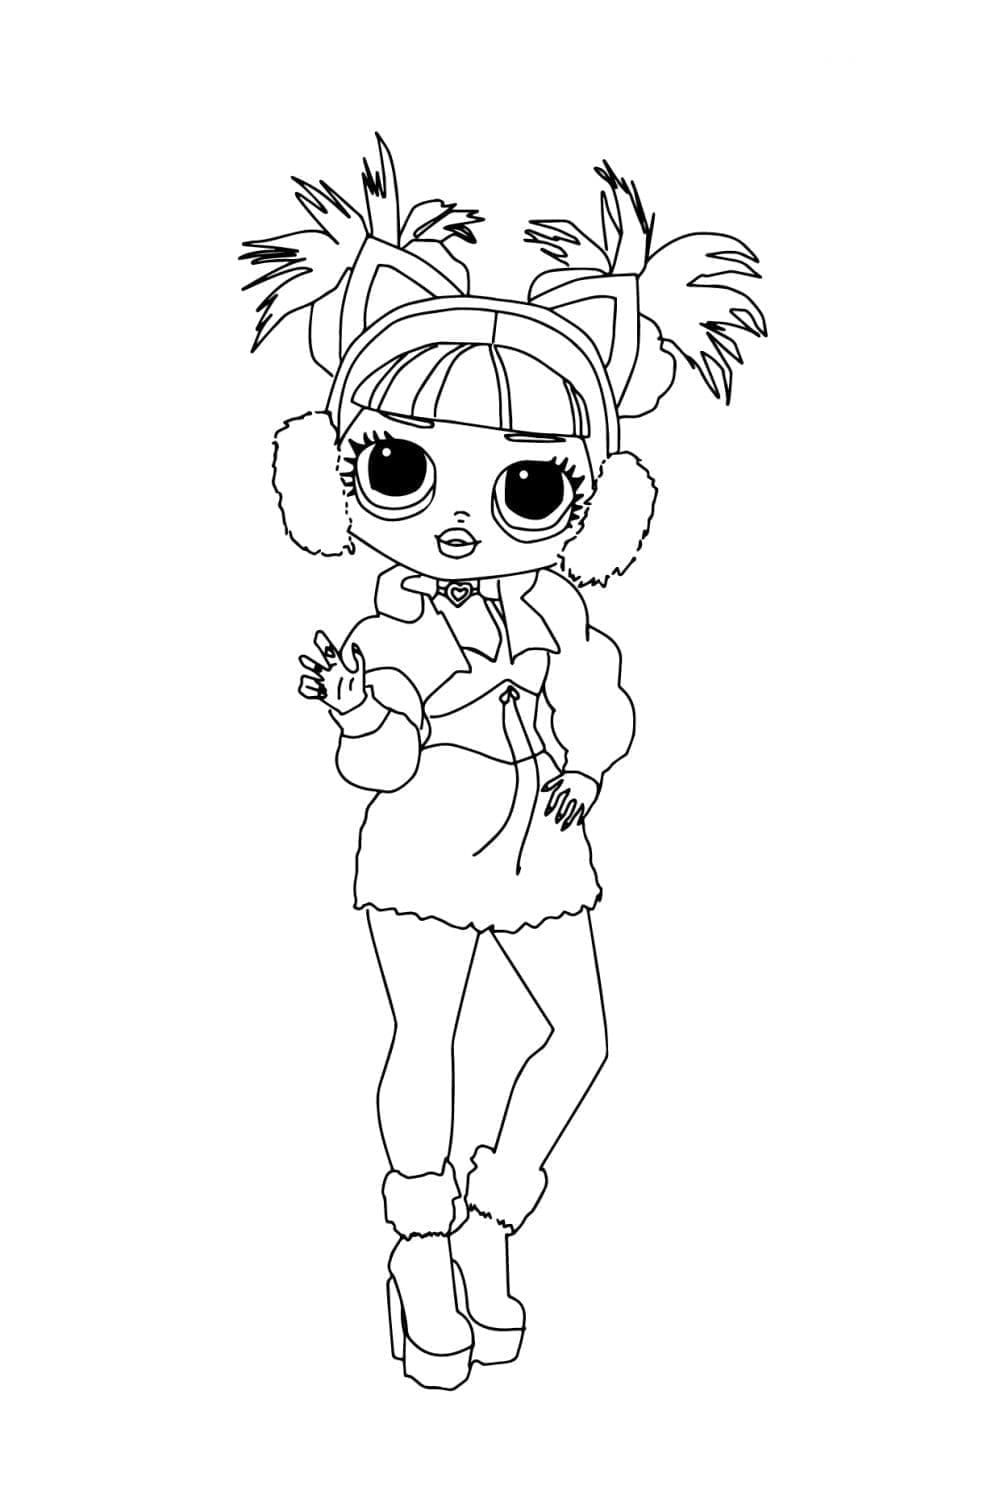 Missy Meow LOL Surprise OMG coloring page